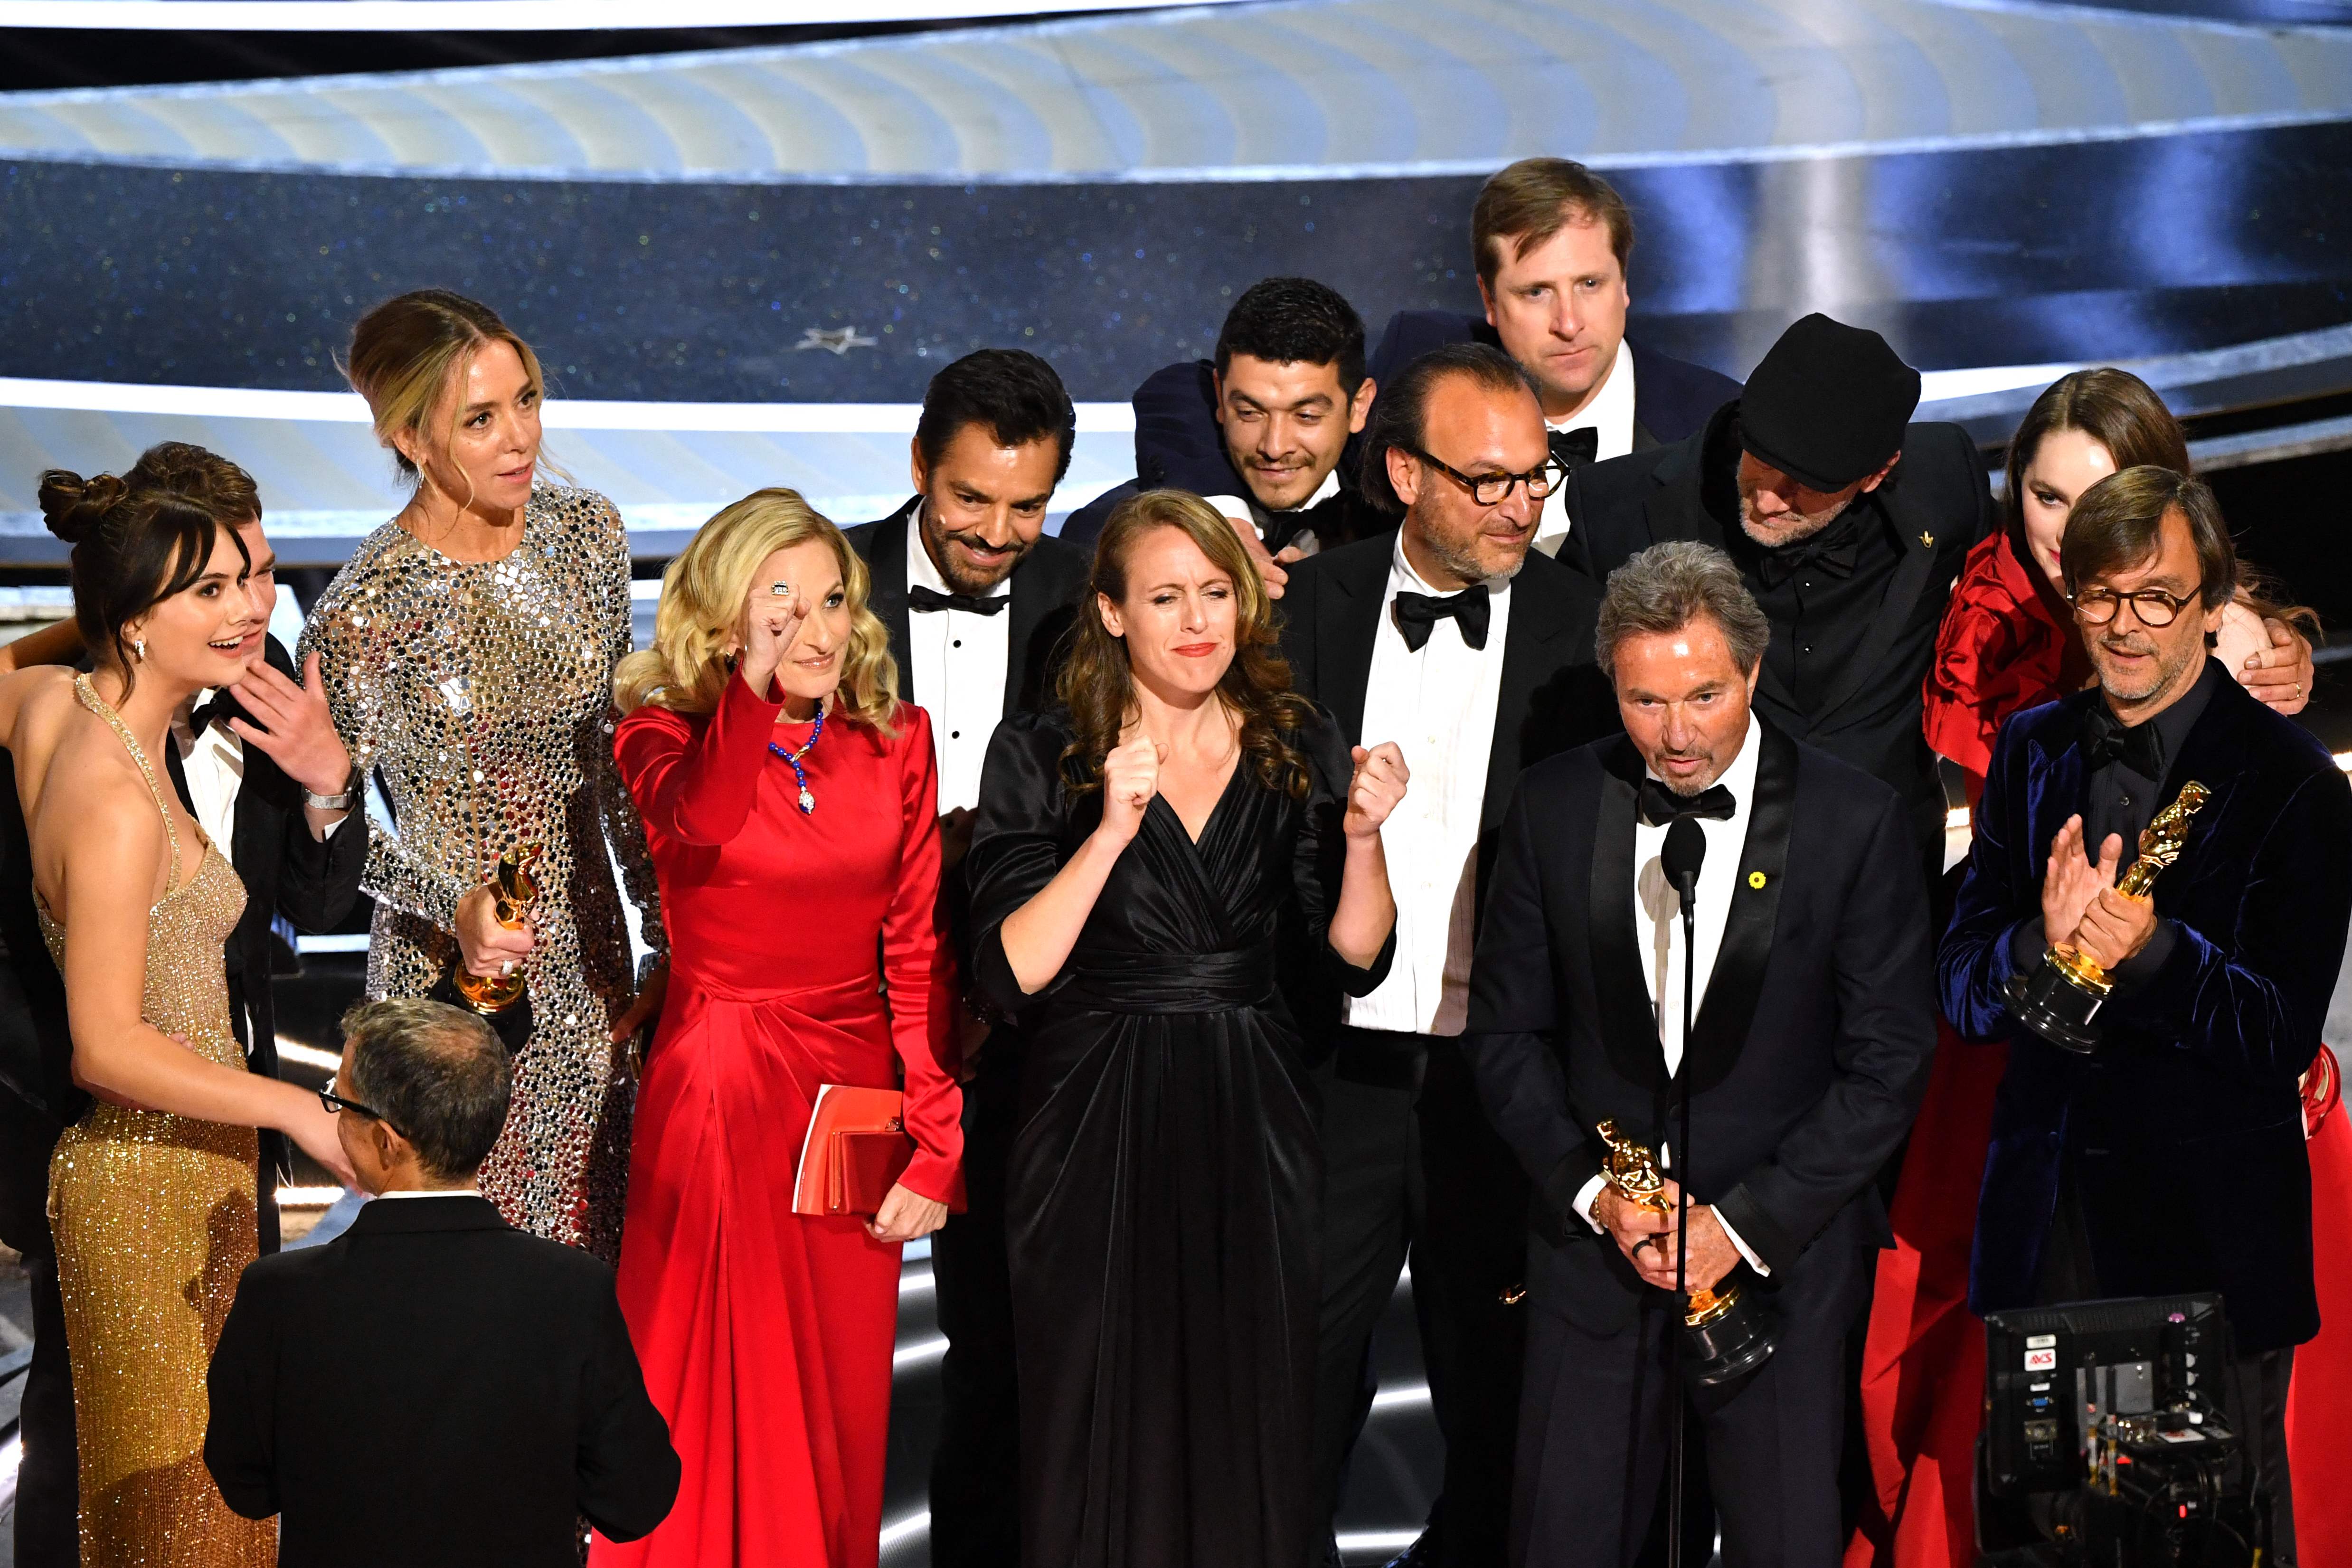 ‘Coda’ cast and crew accept the award for Best Picture onstage during the 94th Oscars at the Dolby Theatre in Los Angeles